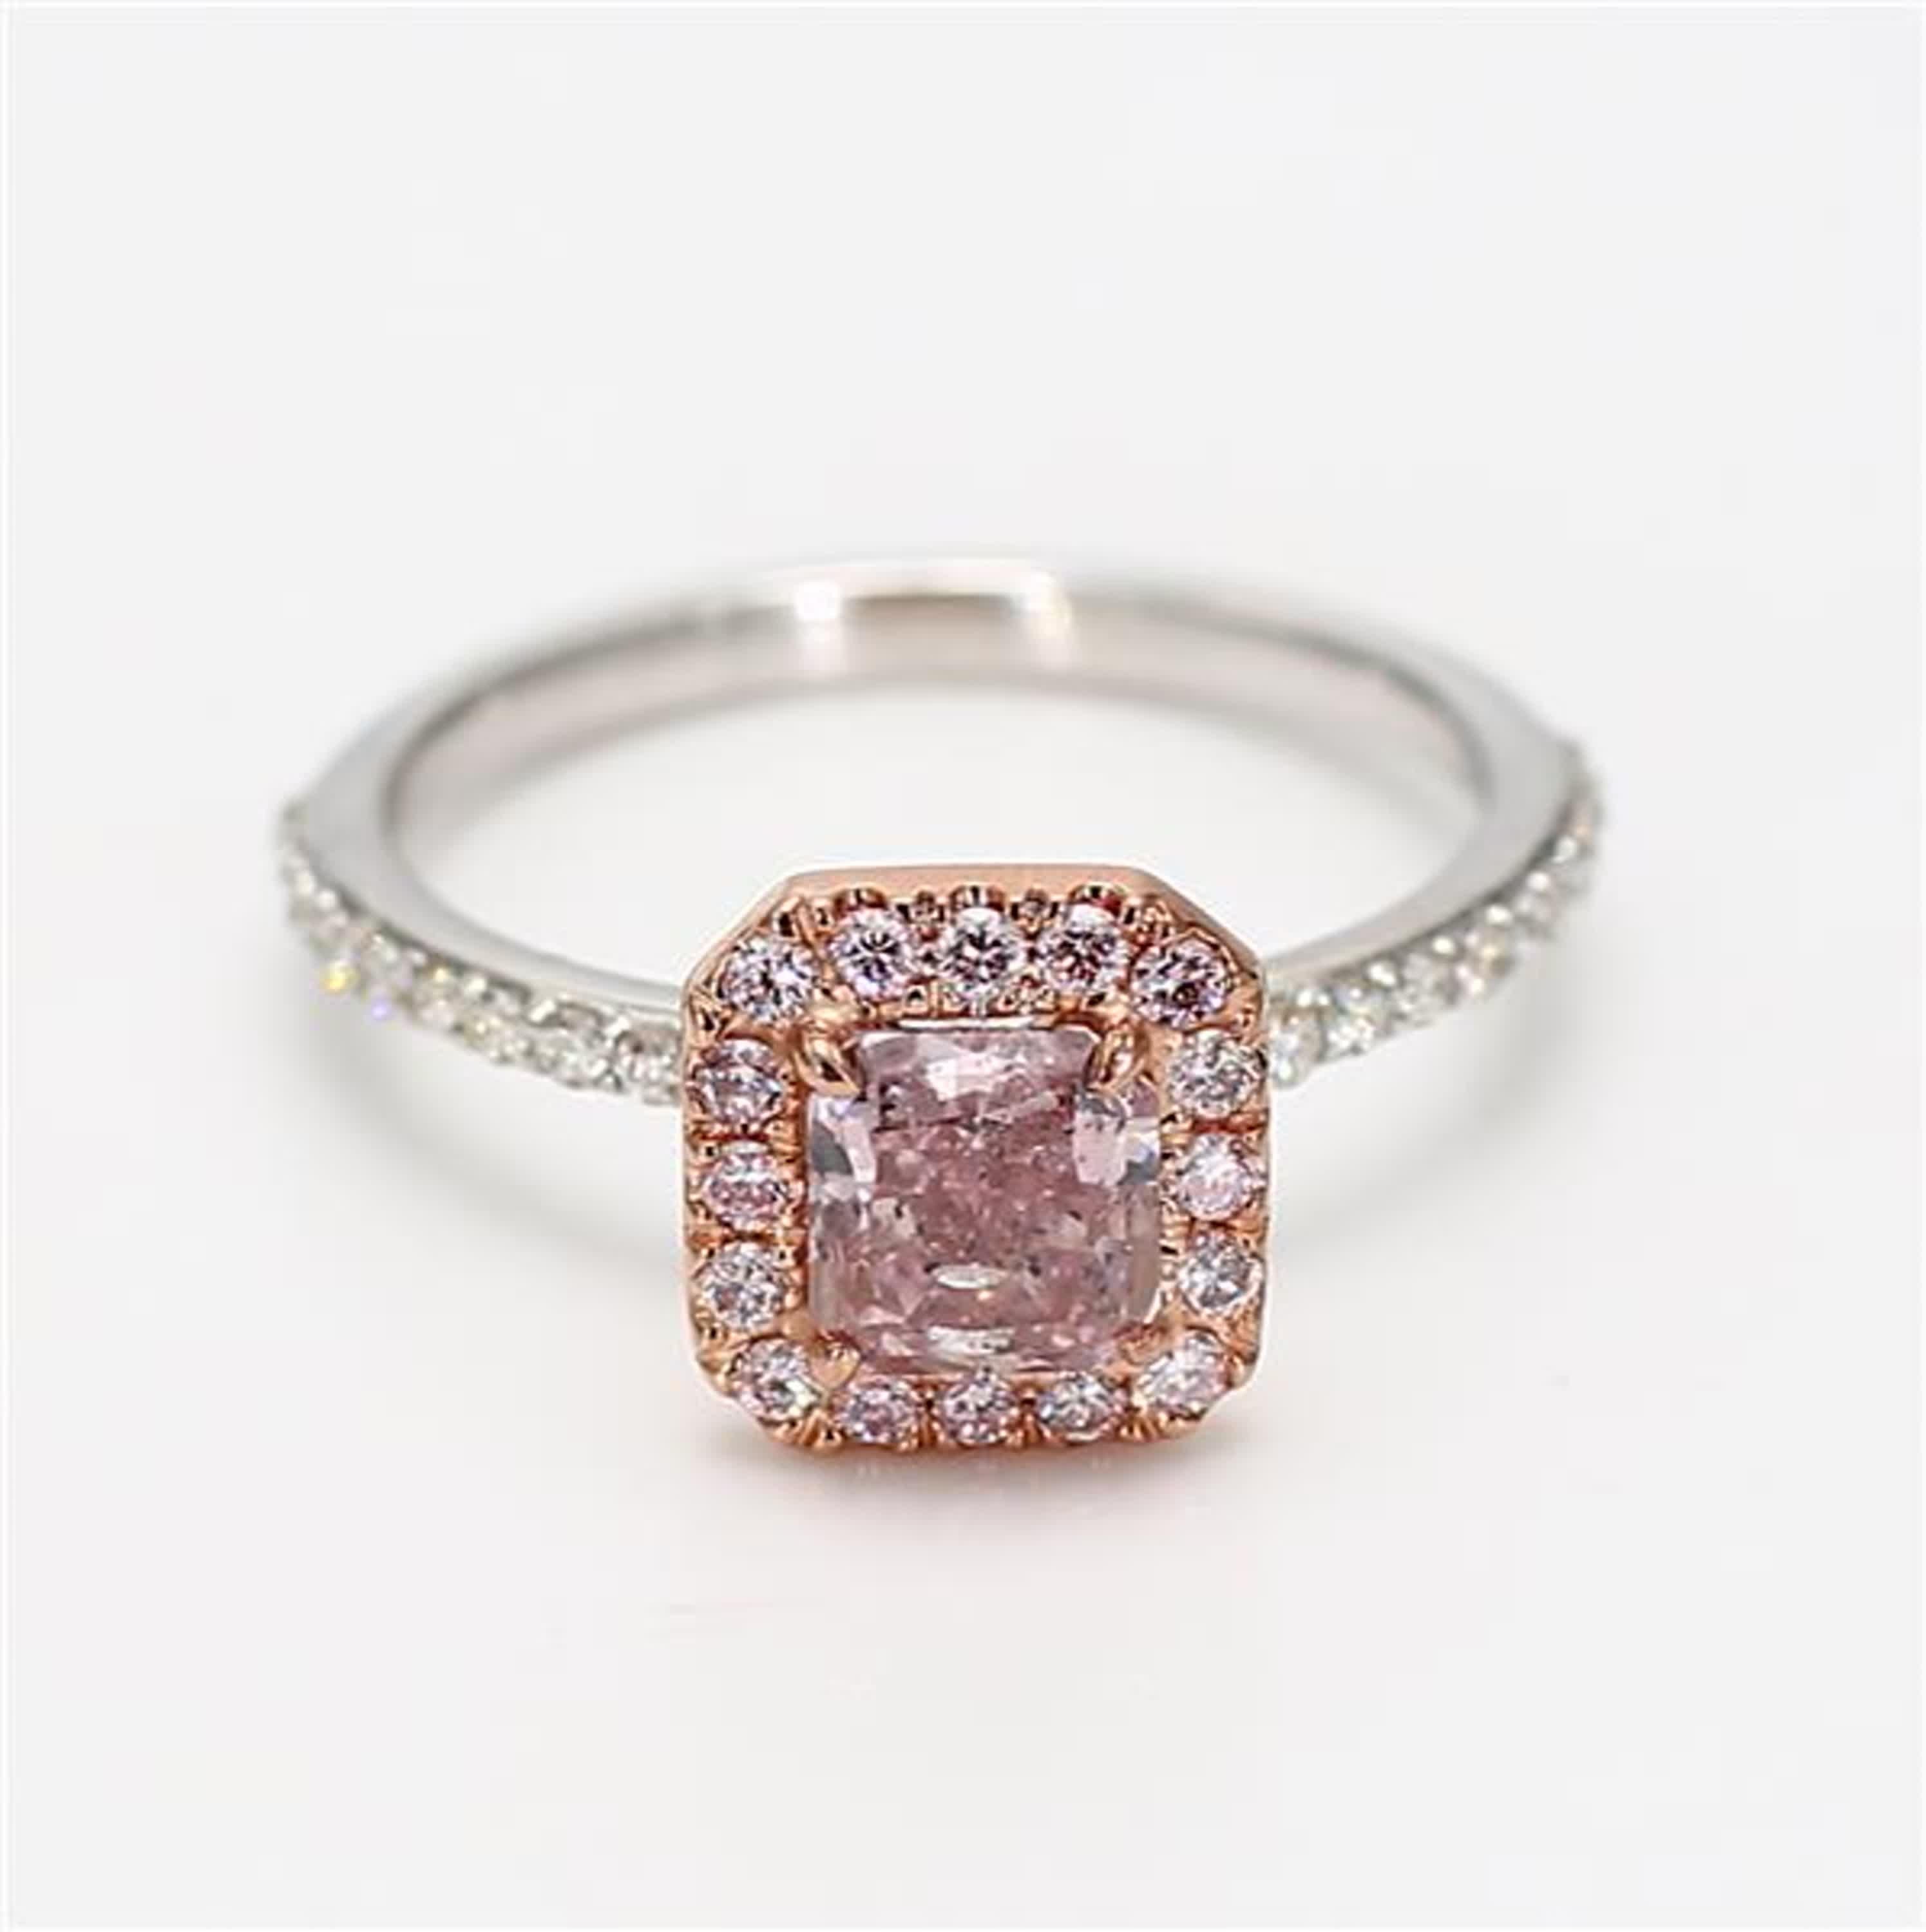 RareGemWorld's classic GIA certified diamond ring. Mounted in a beautiful 18K Rose and White Gold setting with a natural radiant cut pink diamond. The pink diamond is surrounded by round natural pink diamond melee and round natural white diamond